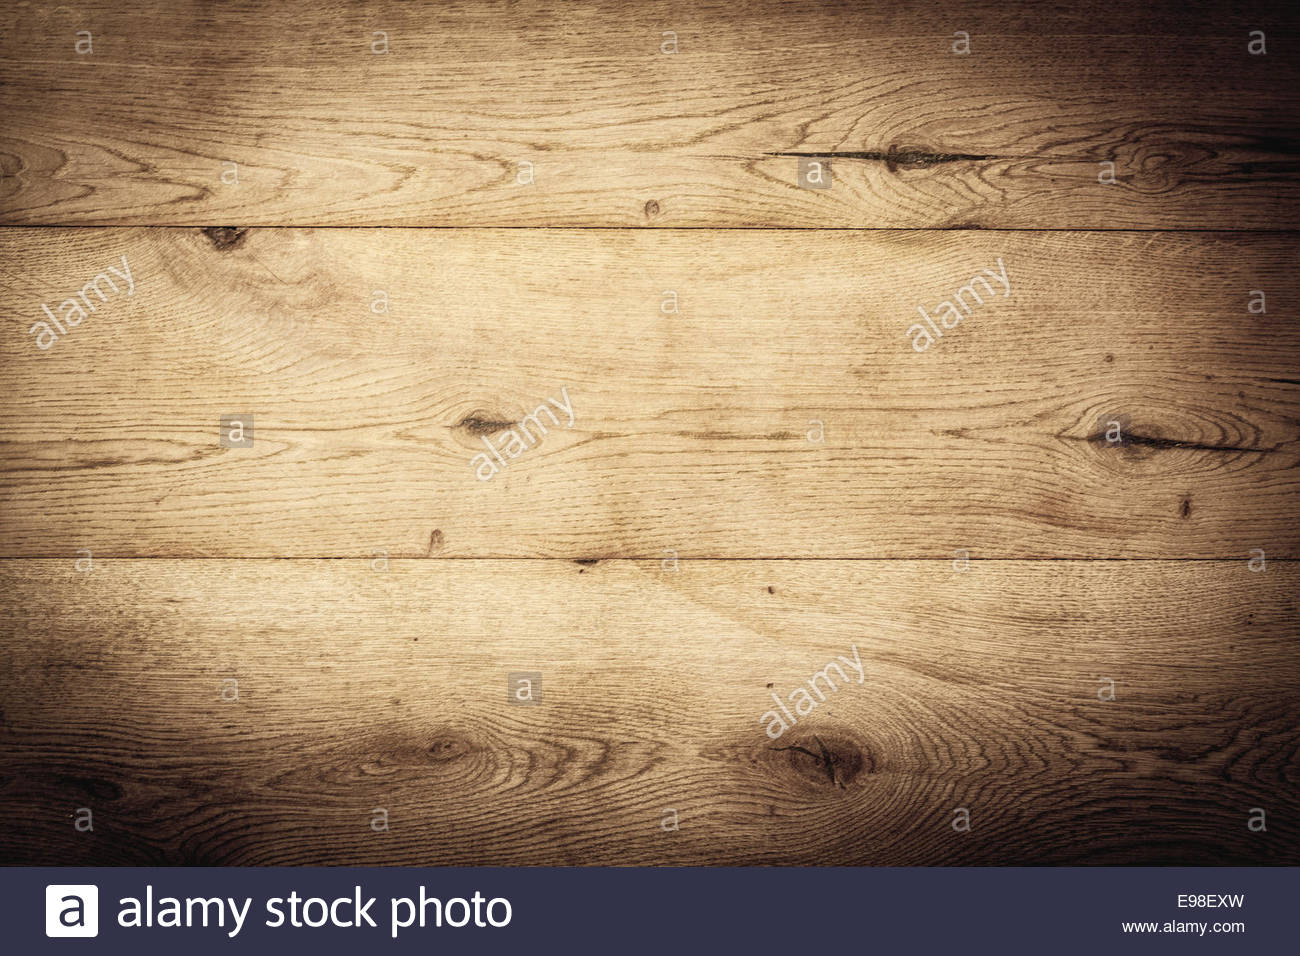 Old Brown Oak Background With Vigte Blank And Empty Rustic